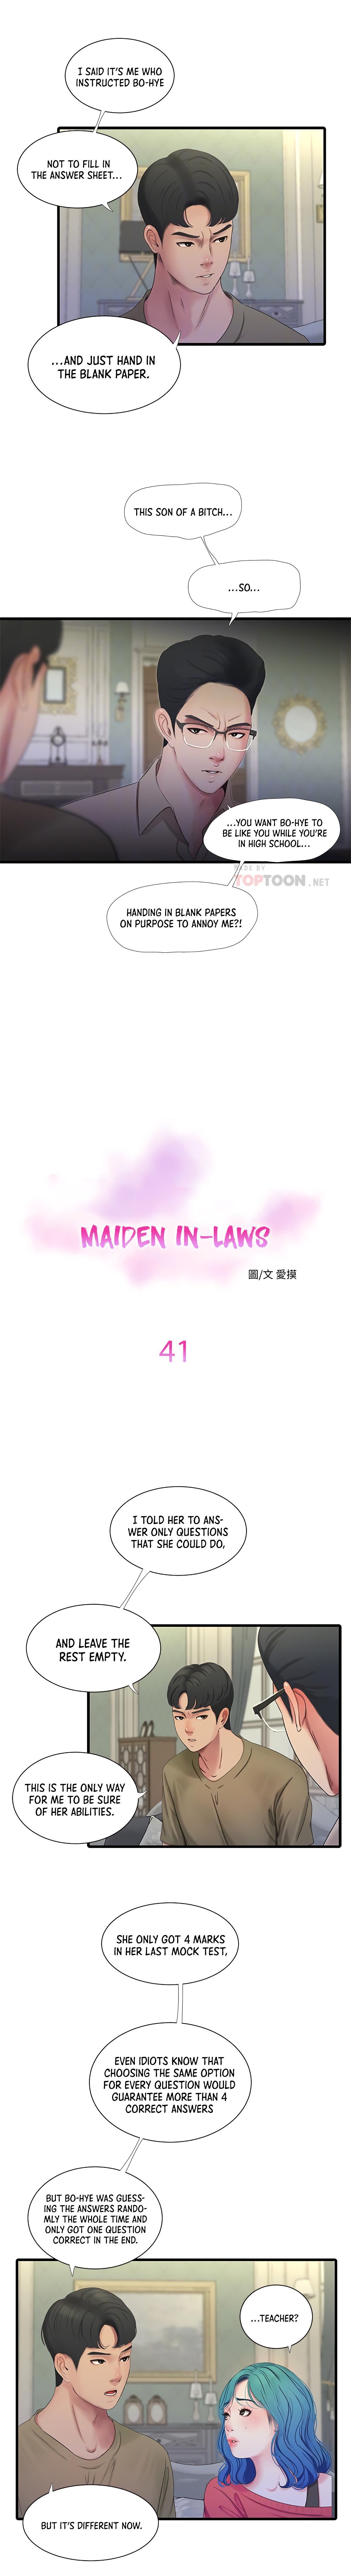 maidens-in-law-chap-41-3